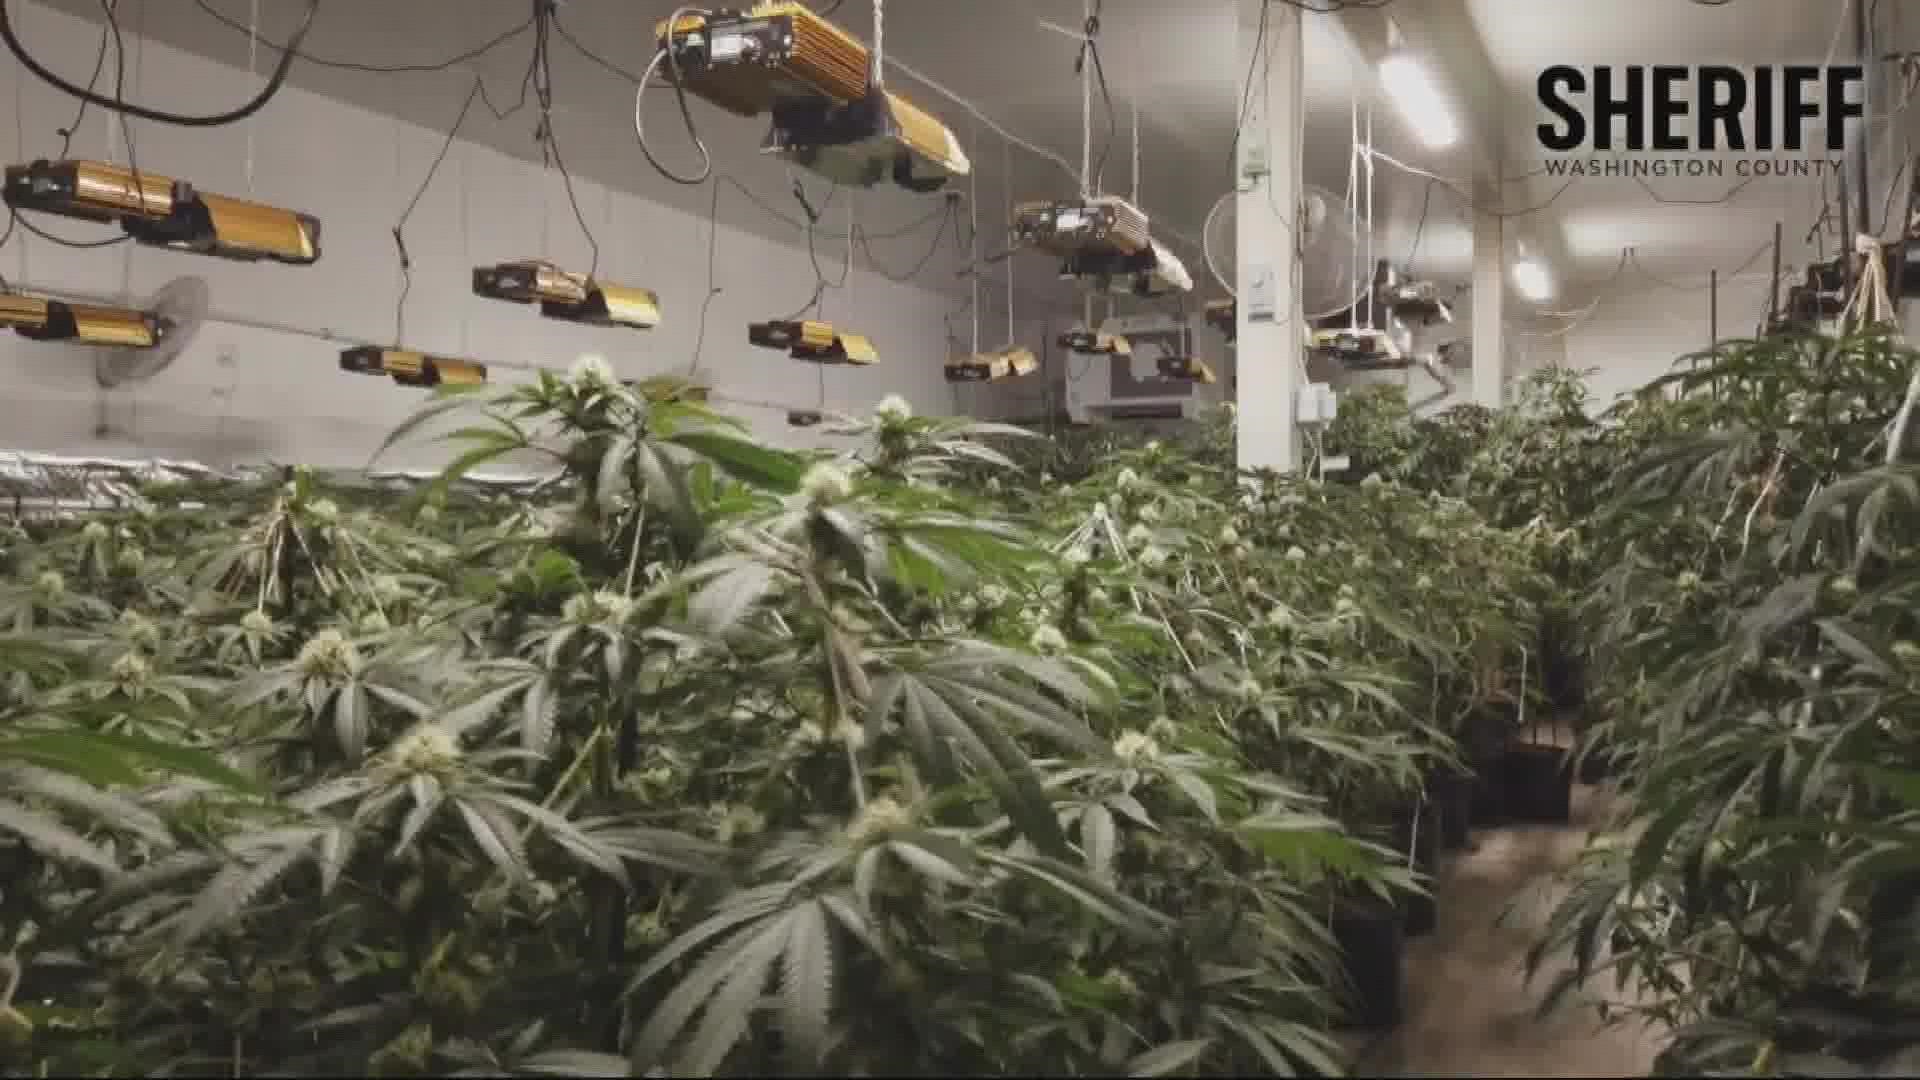 Authorities seized 800 pounds of dried marijuana and more than 5,700 plants with an estimated value of $6.5 million. KGW's Mike Benner reports.